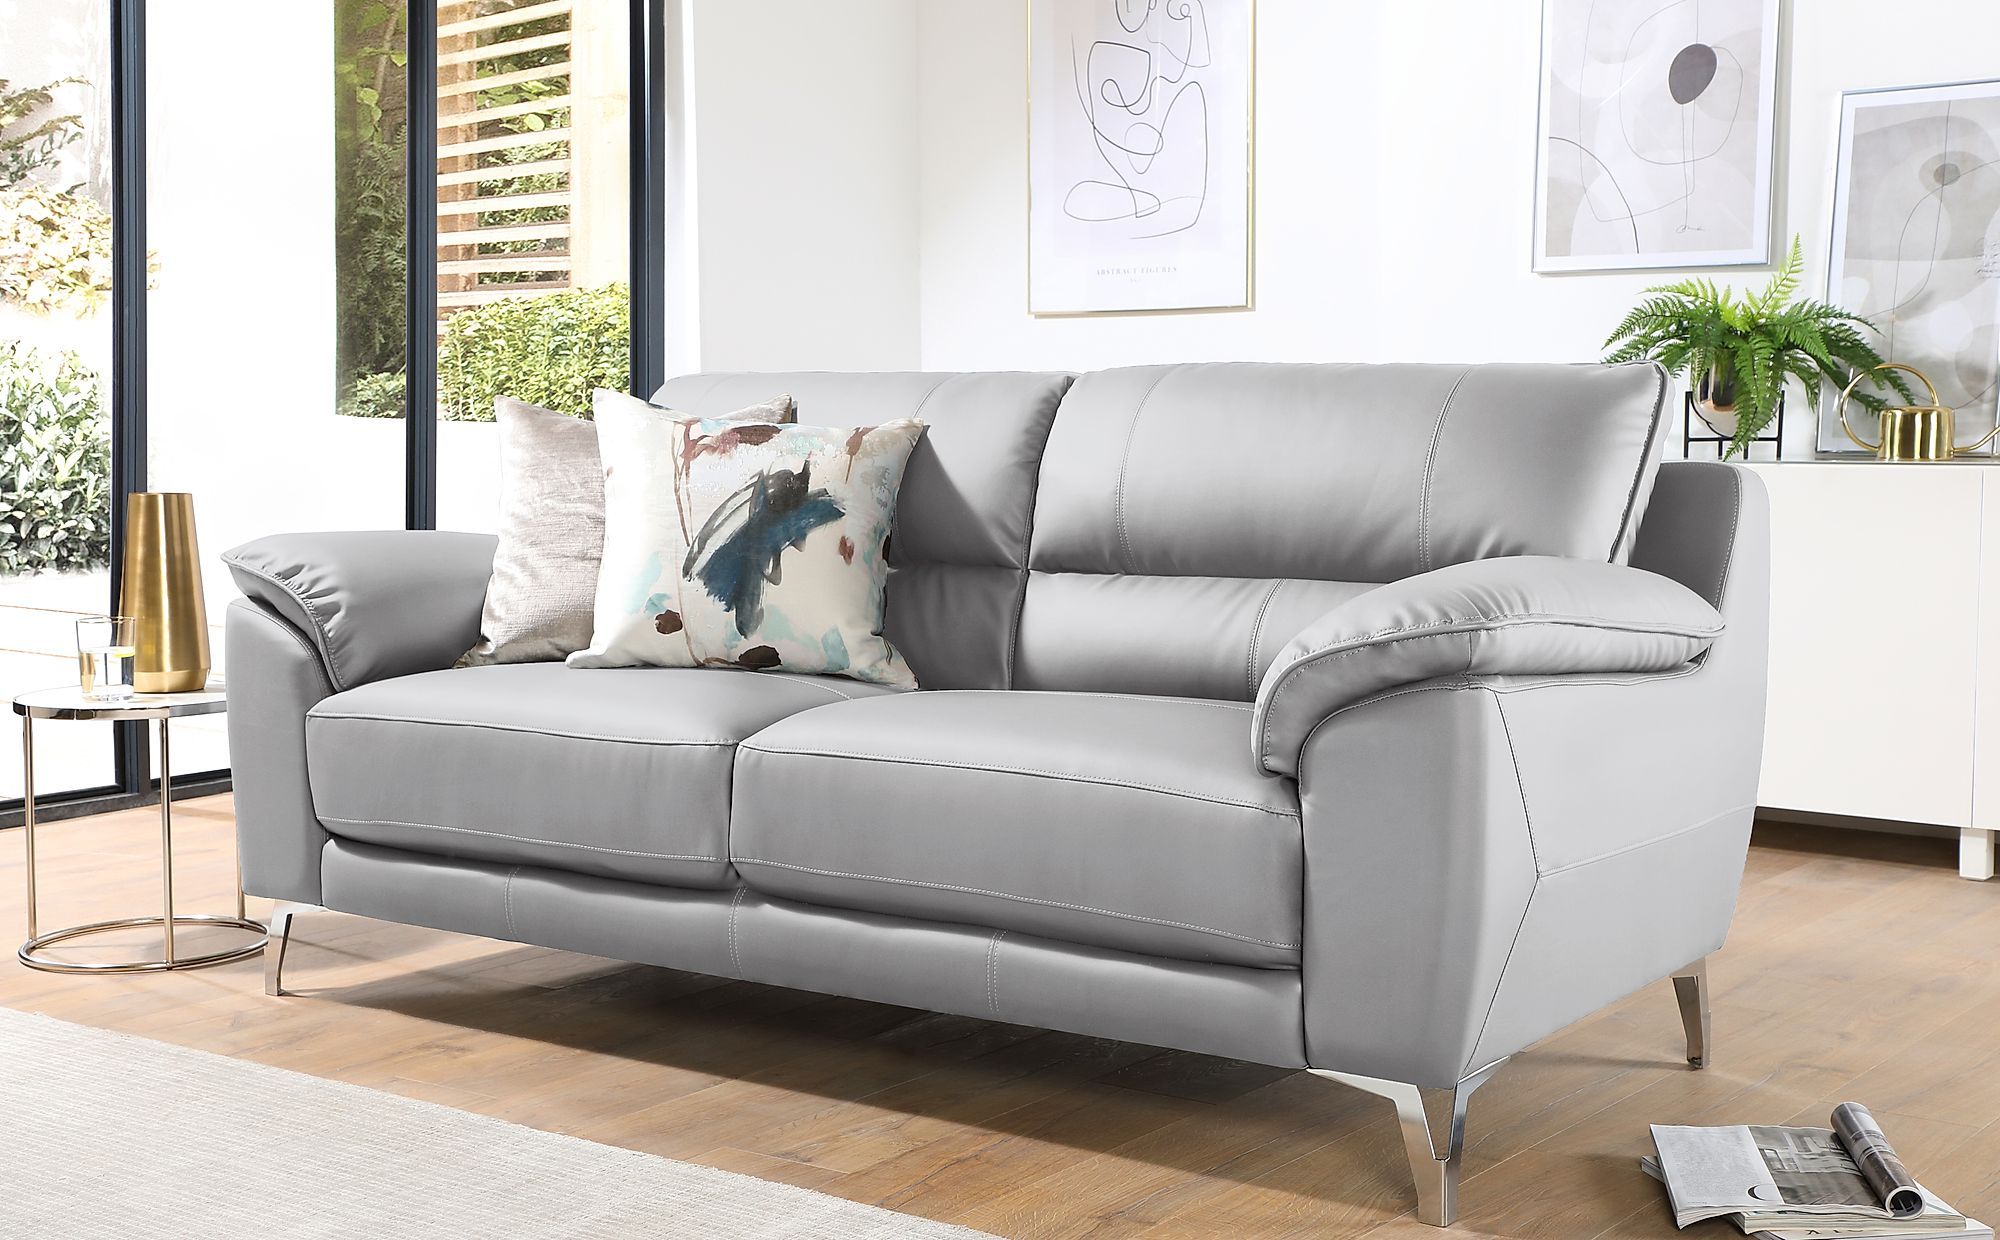 Madrid Light Grey Leather 3 Seater Sofa | Furniture Choice Within Modern Light Grey Loveseat Sofas (View 2 of 20)